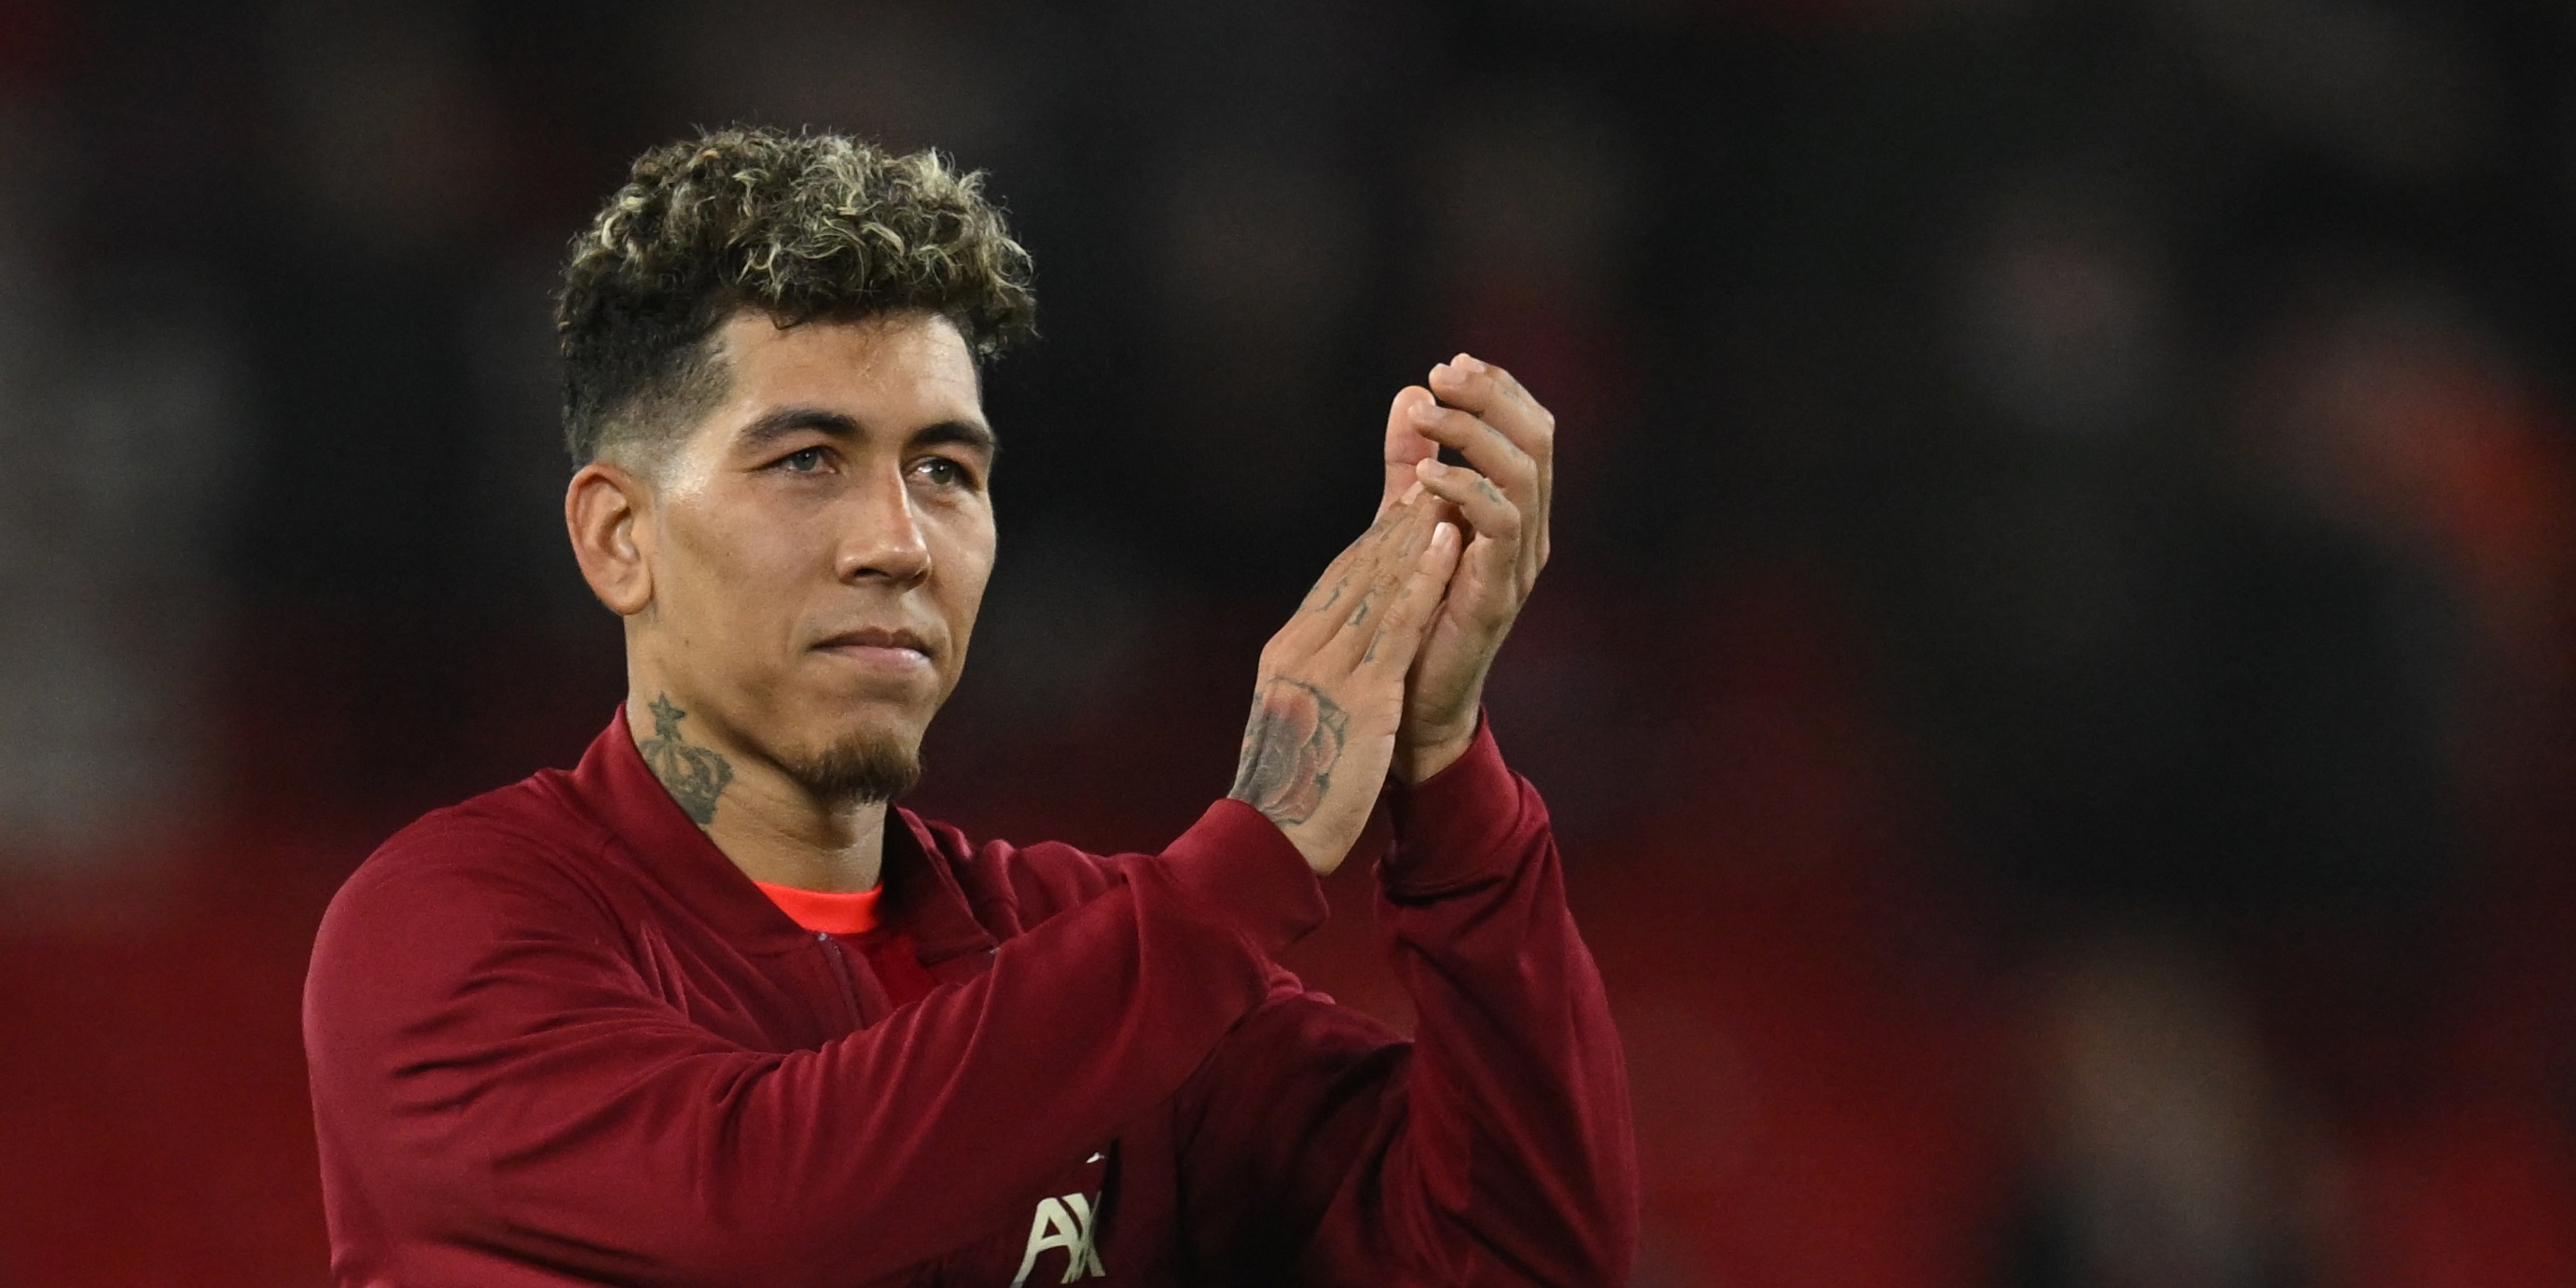 Former Premier League striker explains why Bobby Firmino’s return to fitness is a ‘massive boost’ for Liverpool